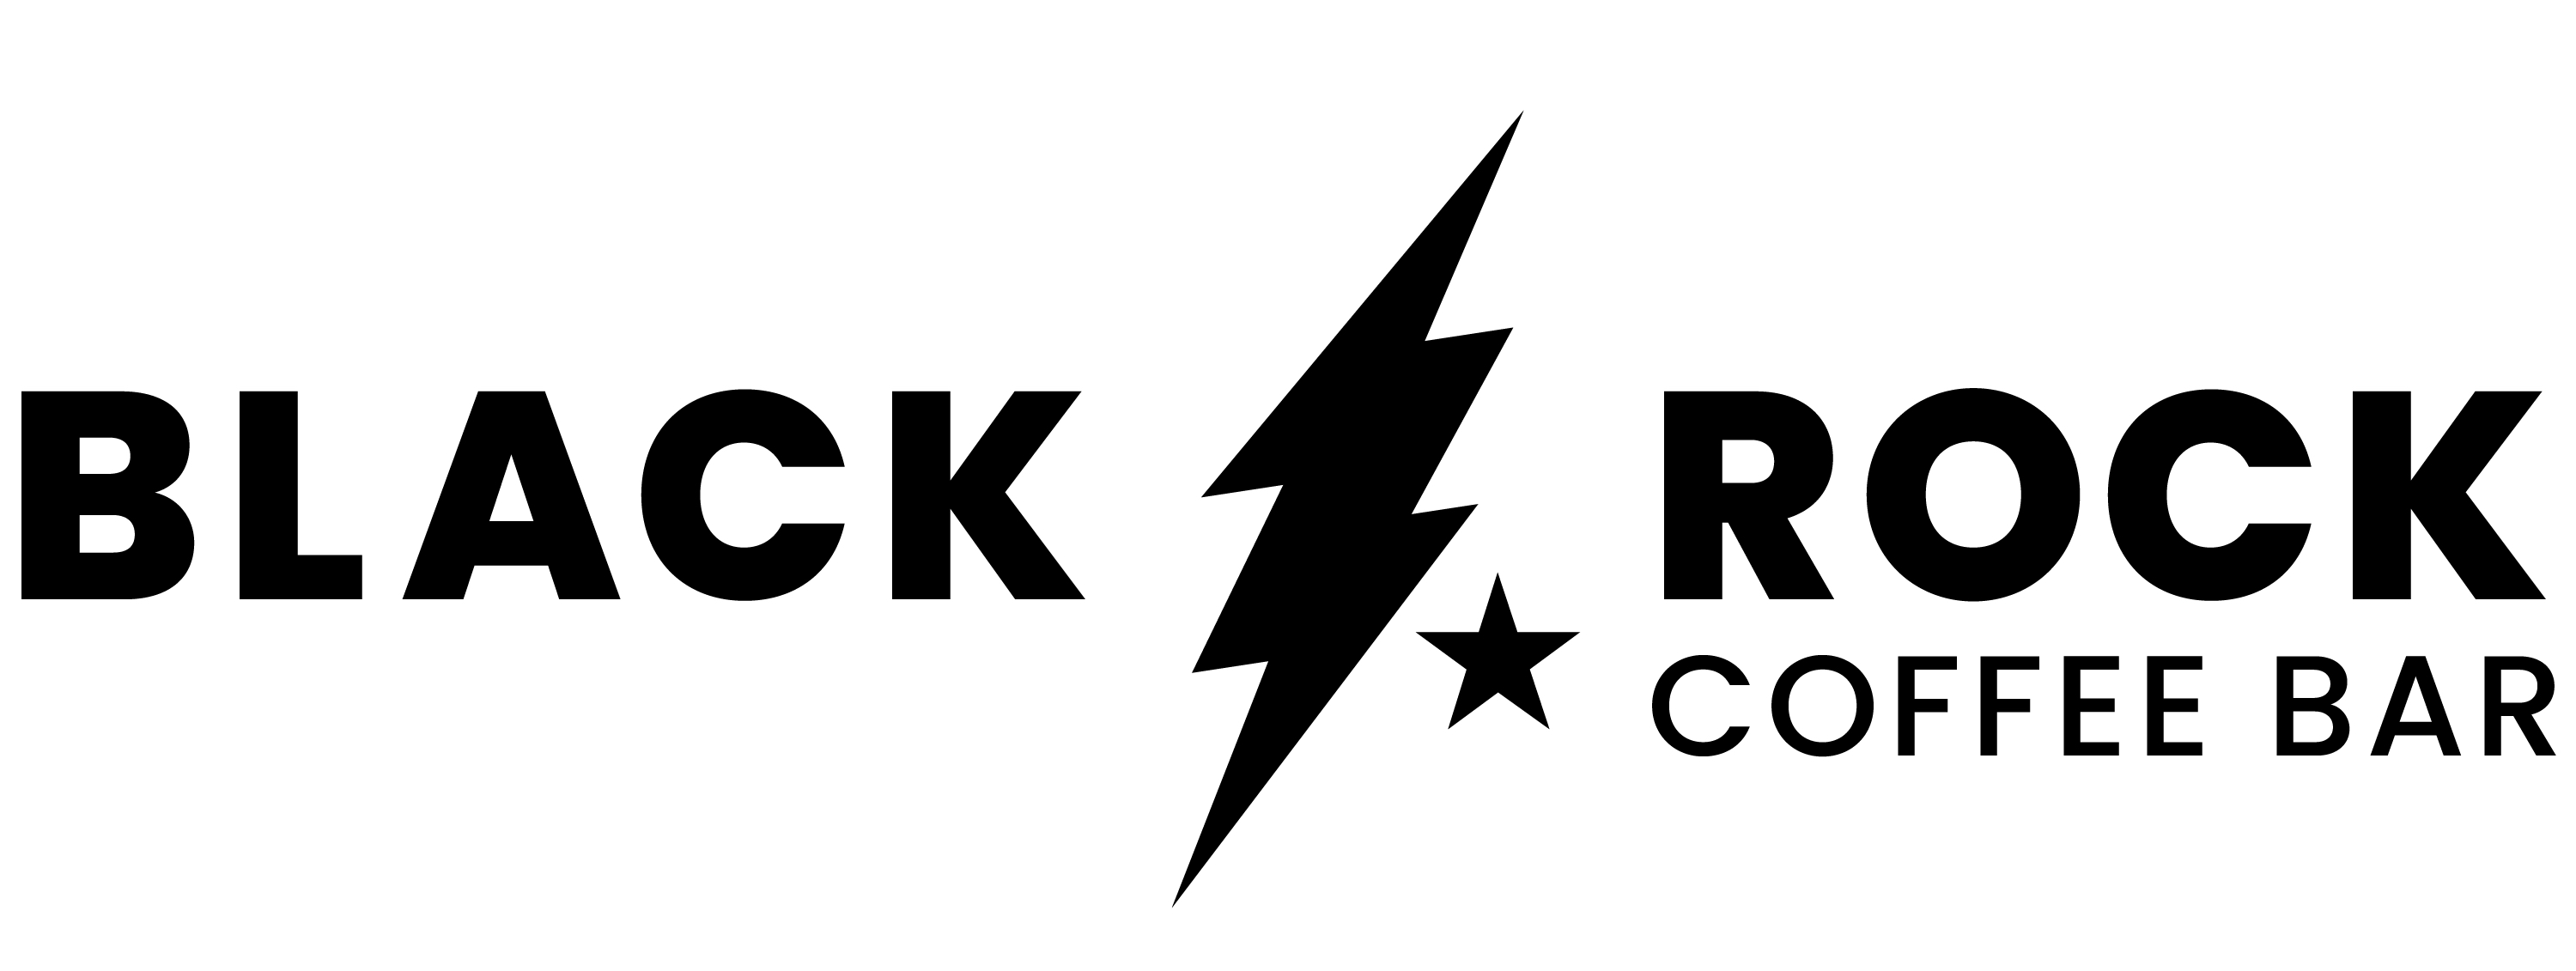 Black Rock Coffee Bar Continues Impressive Texas Expansion with Fifth Austin Metro Area Store Opening and 27th in the Lonestar State